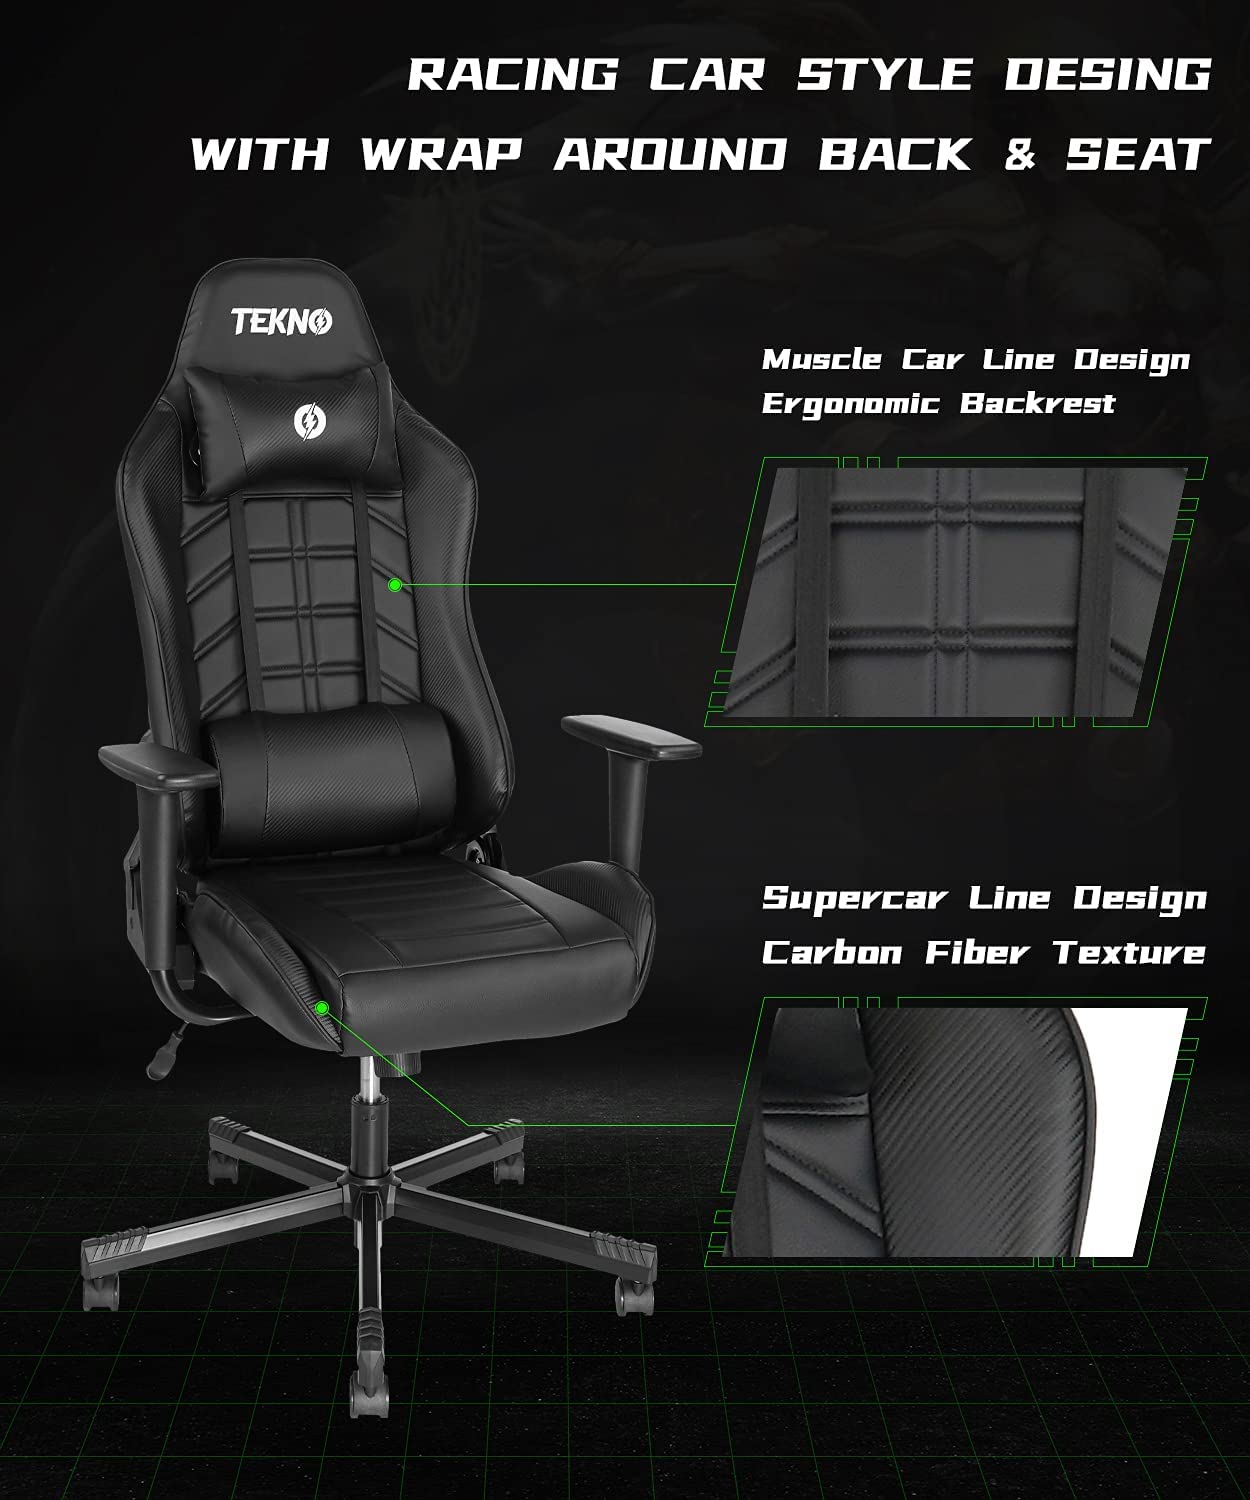 Lumbar Support Mesh Back Support Cushion for Car Seat, Office Chair, Gaming  Chair (Black, 2 Pack) 